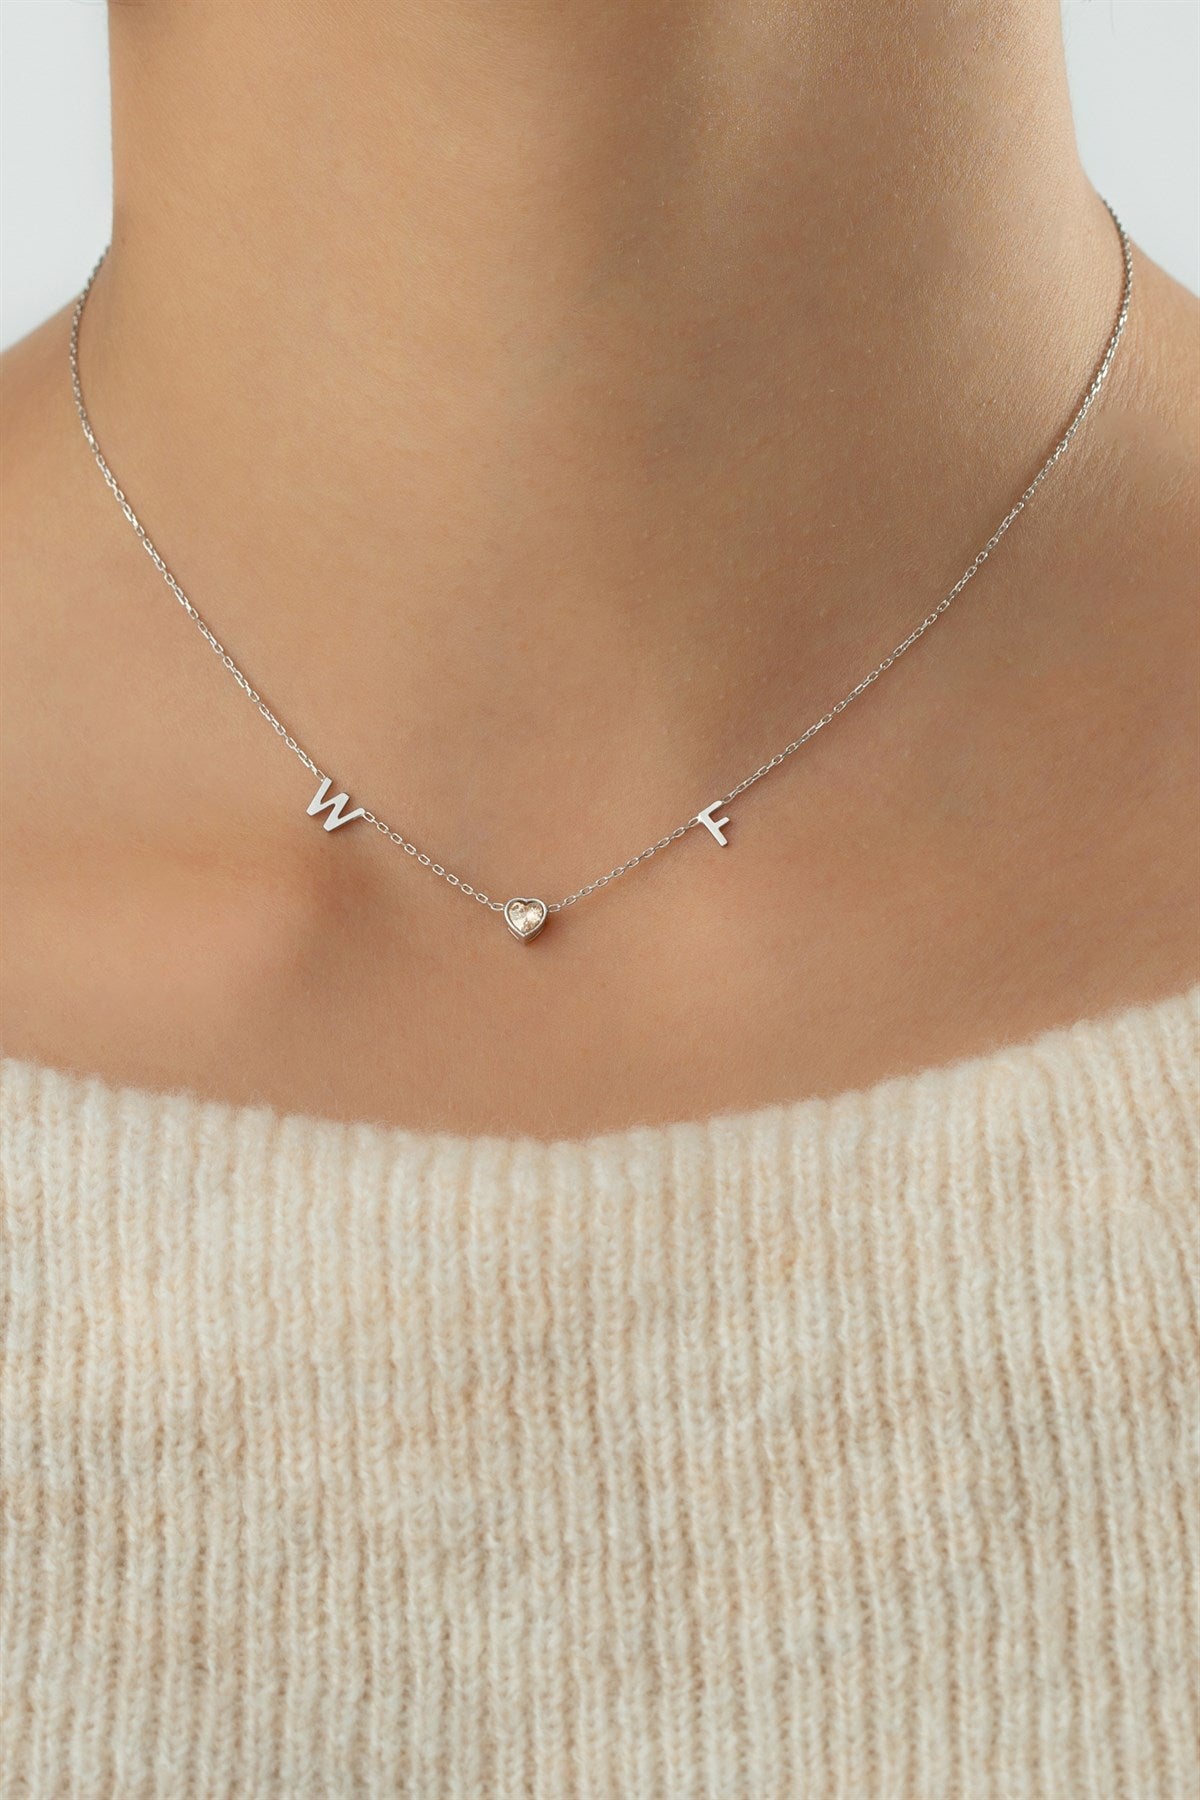 Silver Heart Birthstone Double Initial Necklace